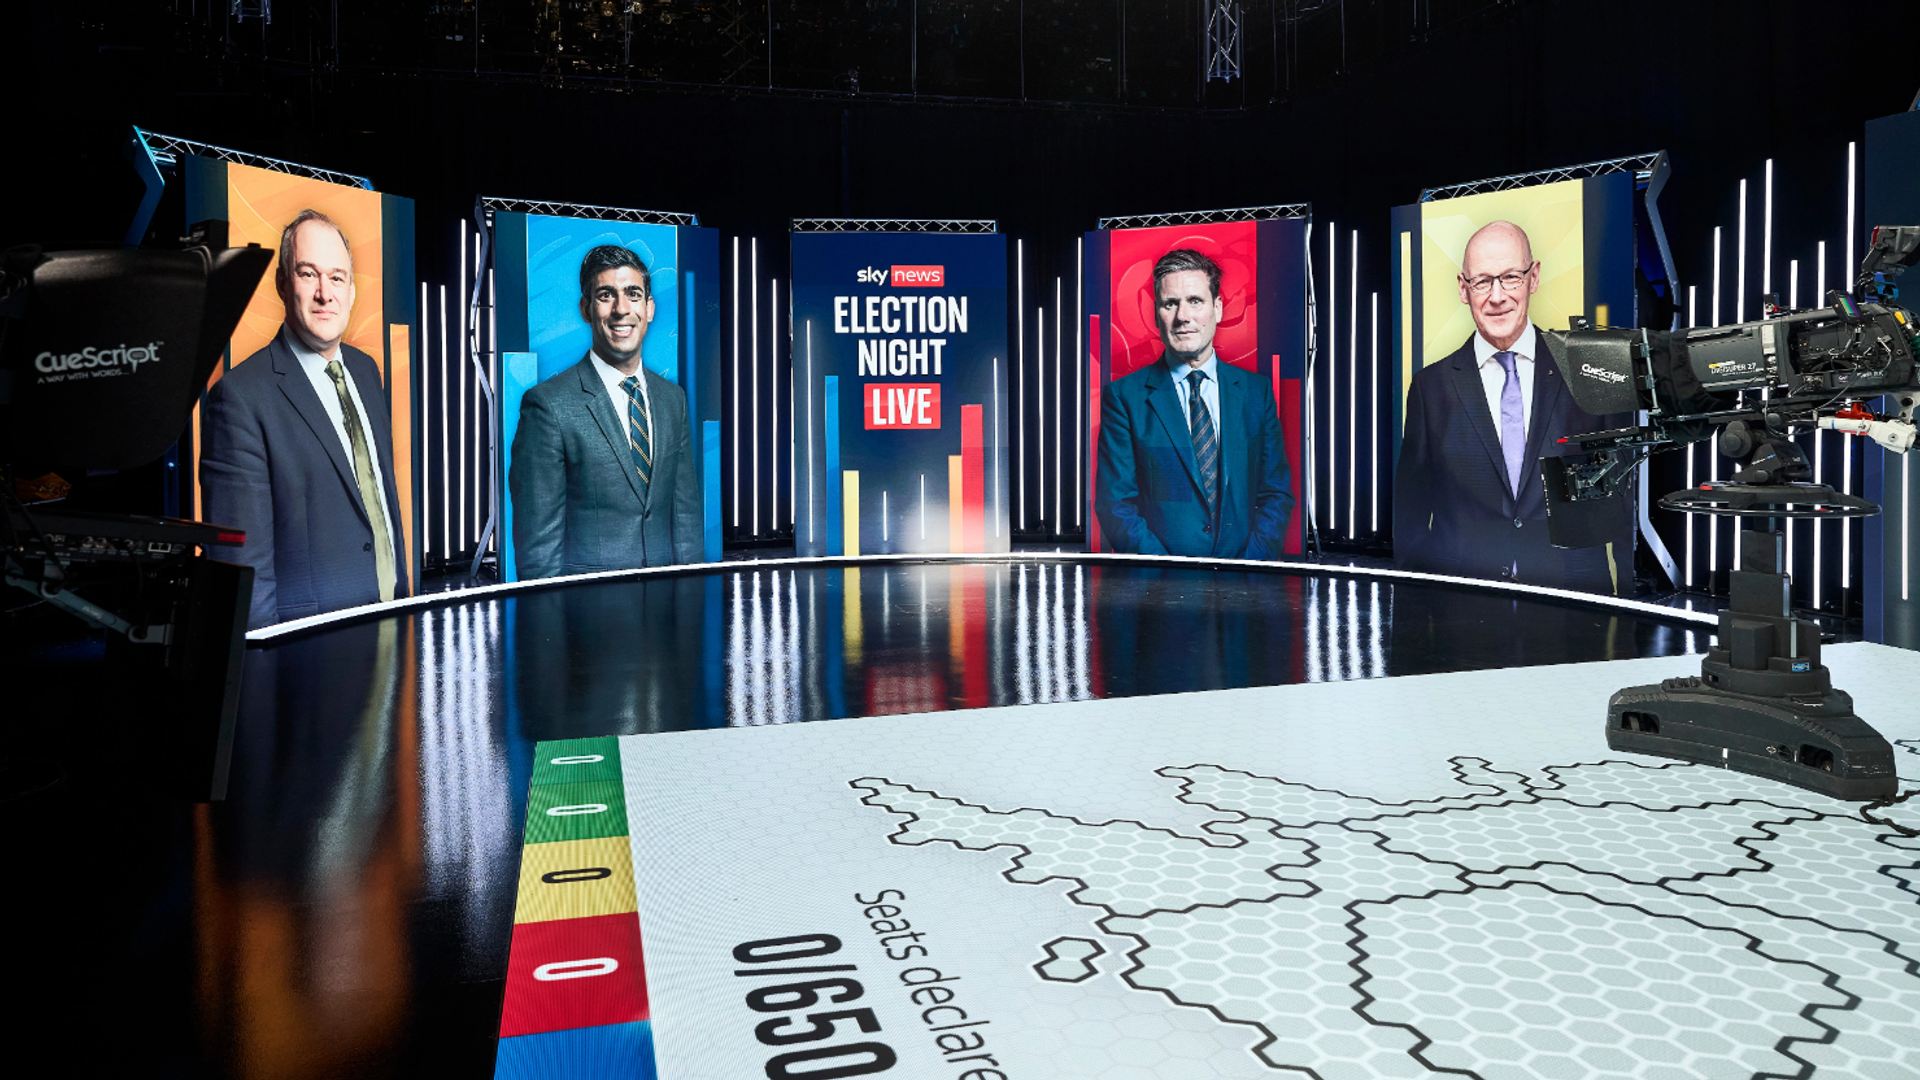 How to watch the general election live on Sky News - on TV, streaming and online